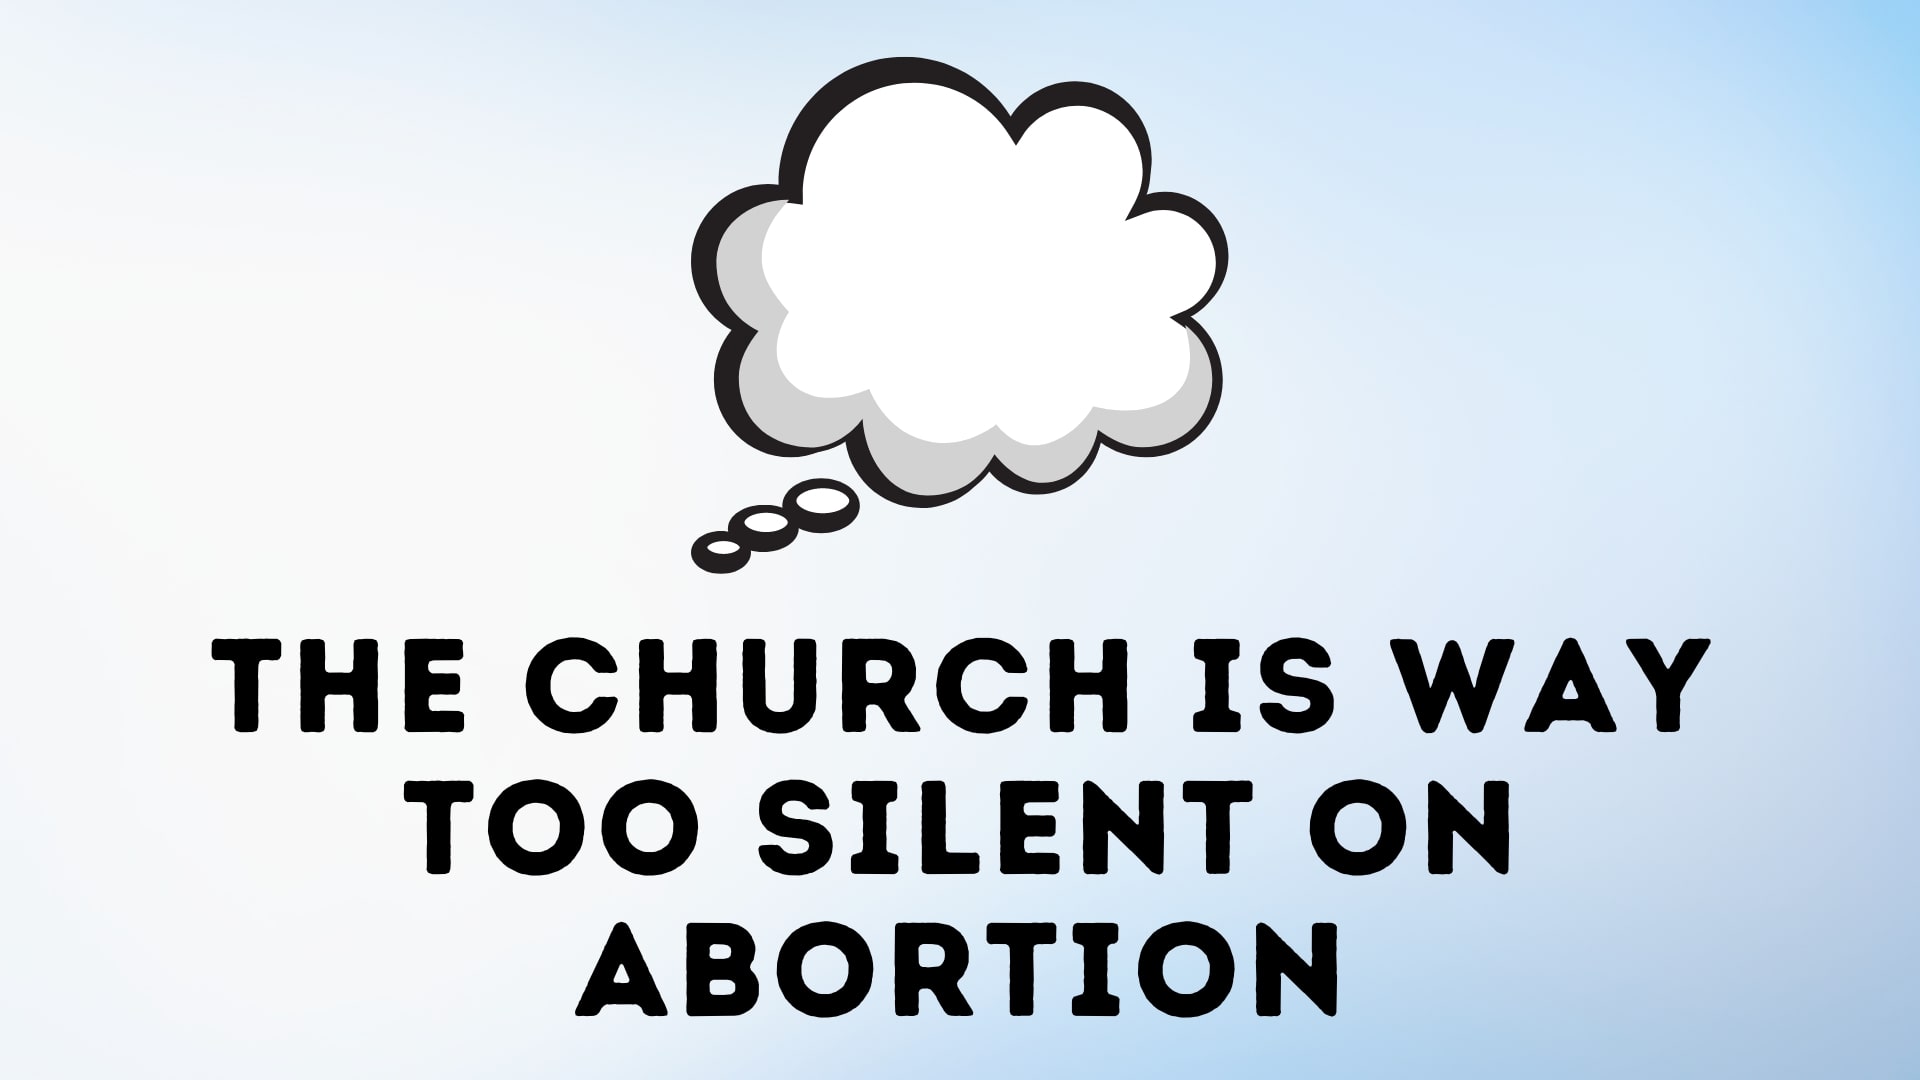 The Church is Way Too Silent on Abortion